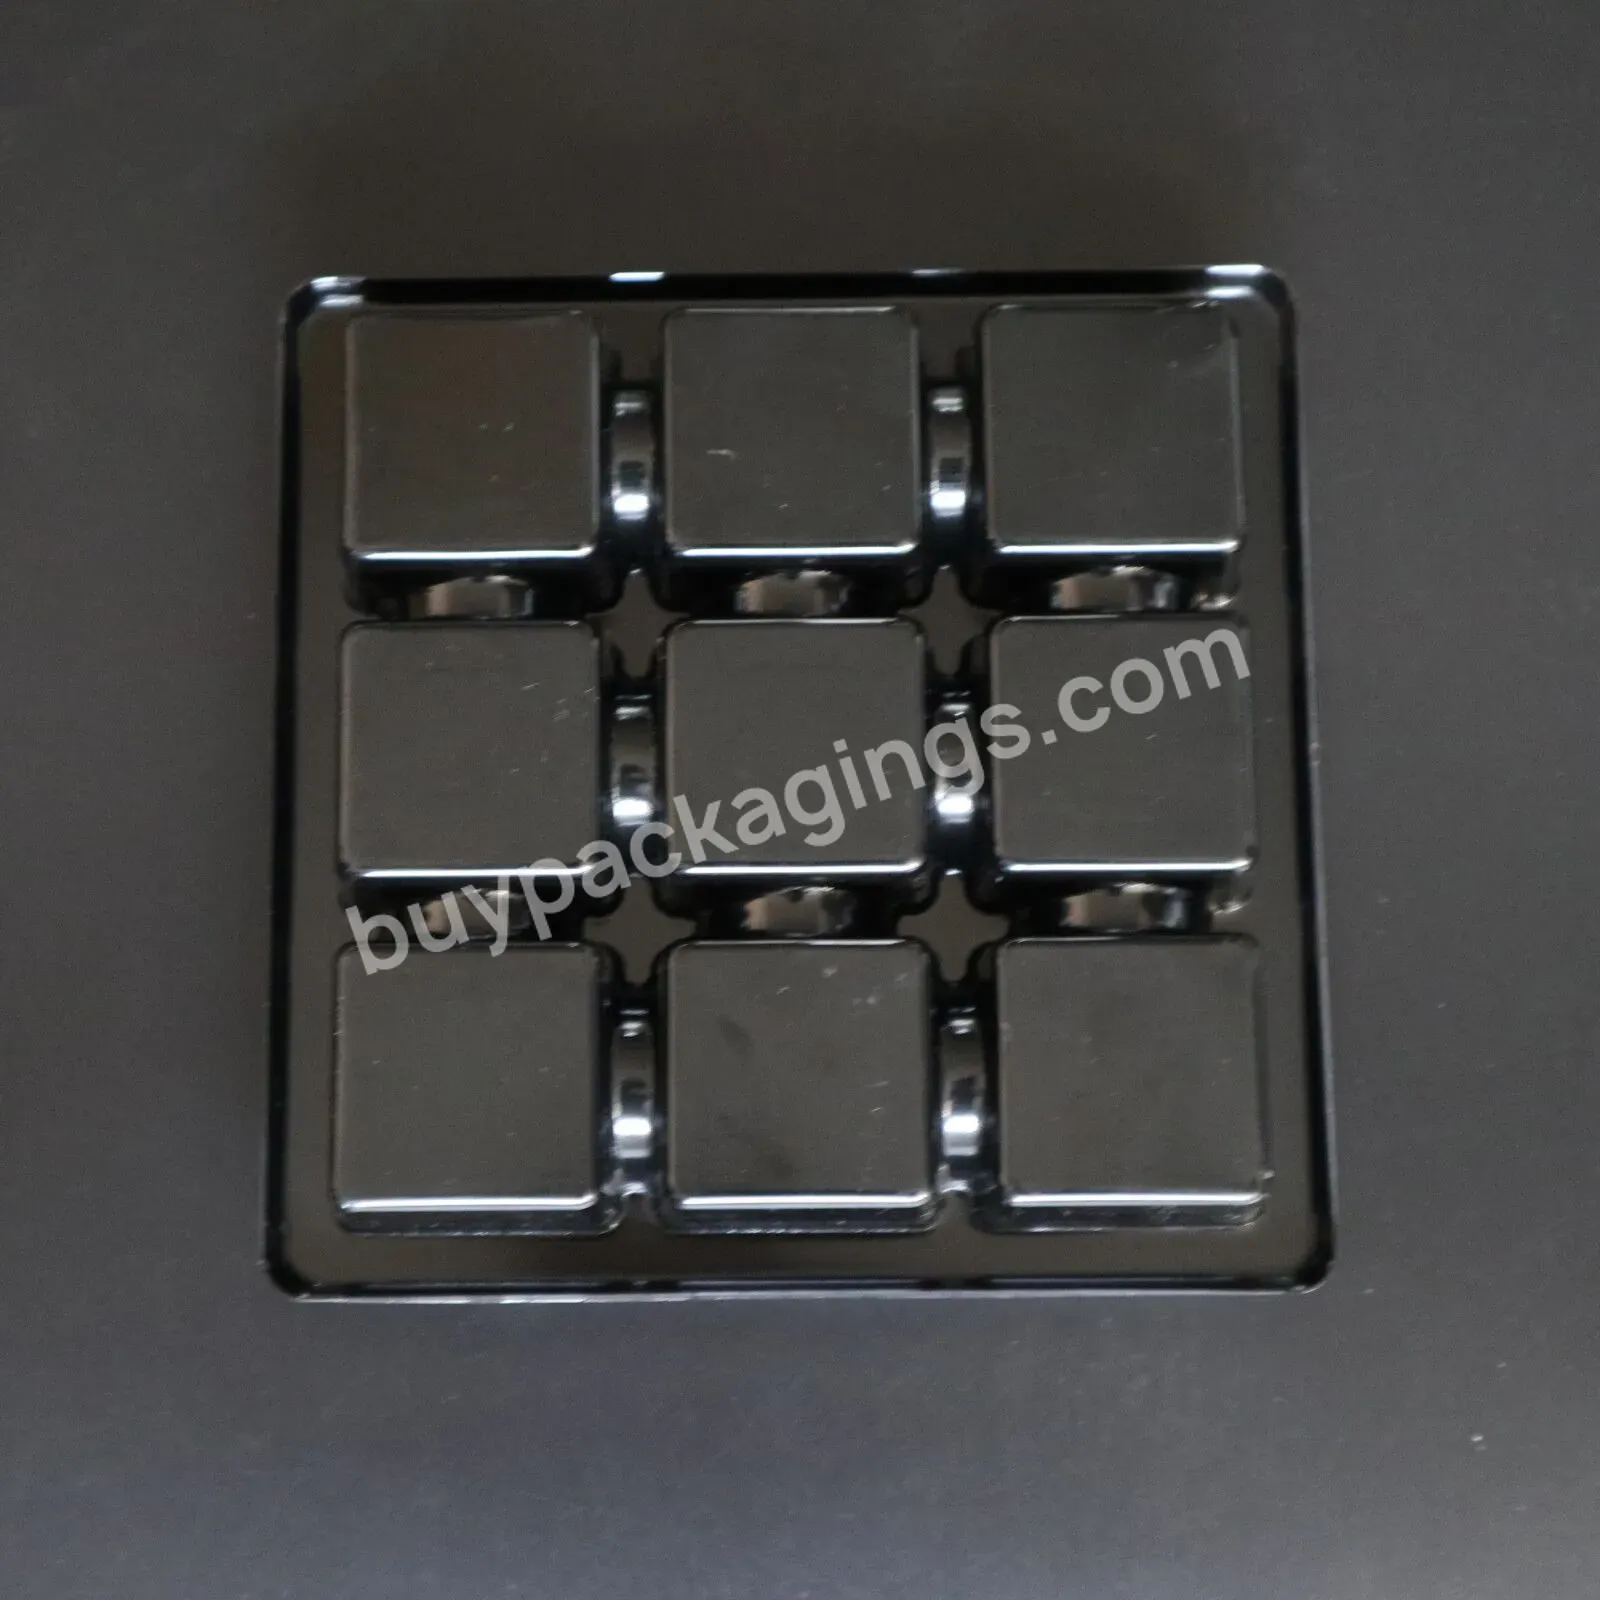 Food Grade Chocolate Candy Packaging With Tray Insert Plastic Tray Chocolate Truffles Box With Tray Insert - Buy Food Grade Plastic Tray Chocolate Truffles Box With,Chocolate Box Blister Inner Tray,Chocolate Candy Packaging With Tray Insert.